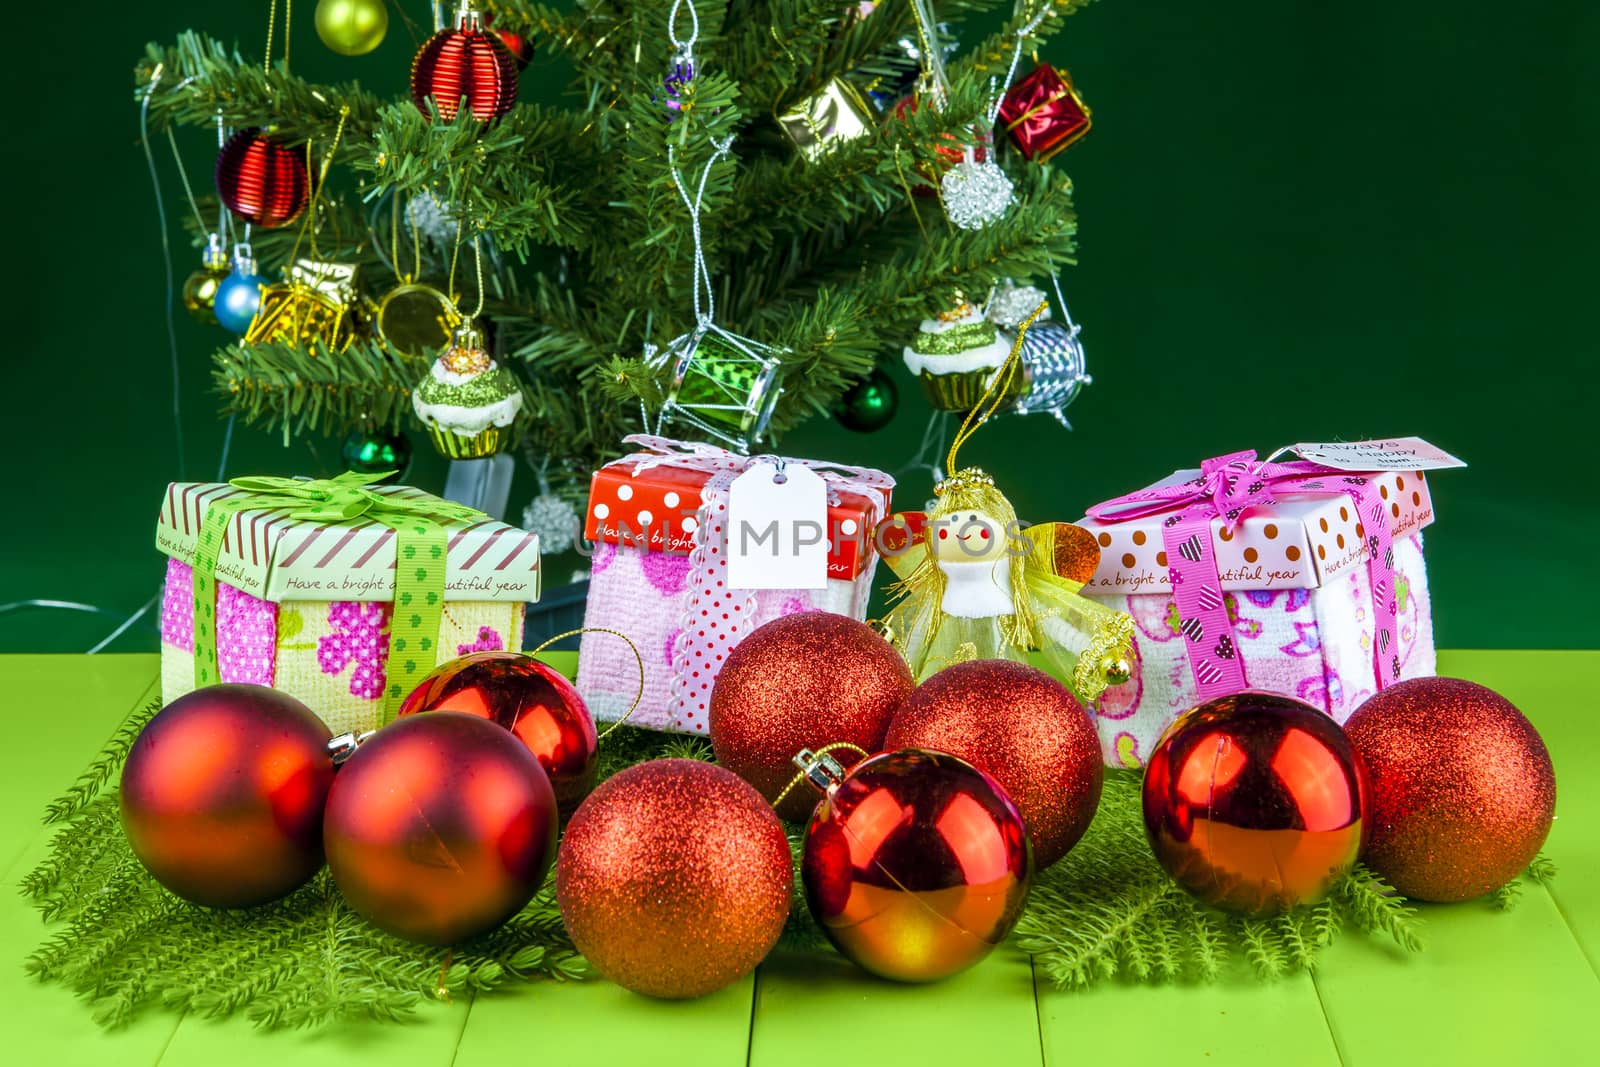 Christmas Decorations present with Christmas tree on background